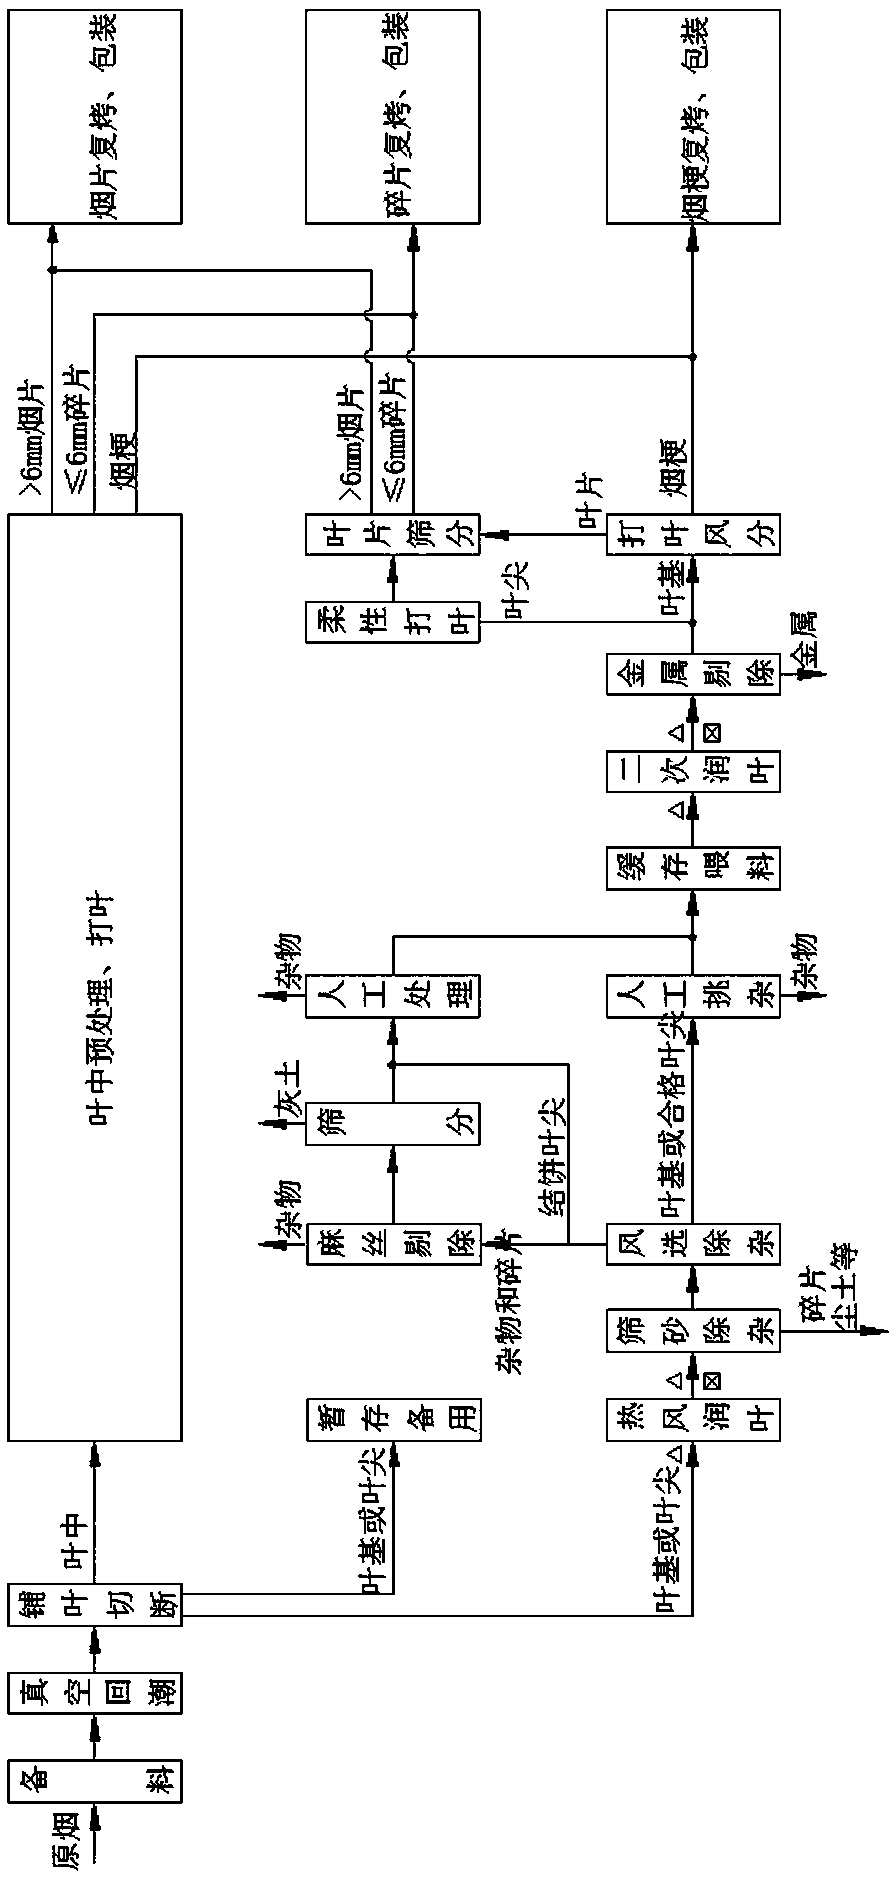 Multifunctional threshing and redrying production line processing technology for leaf bases and leaf tips of tobacco leaves